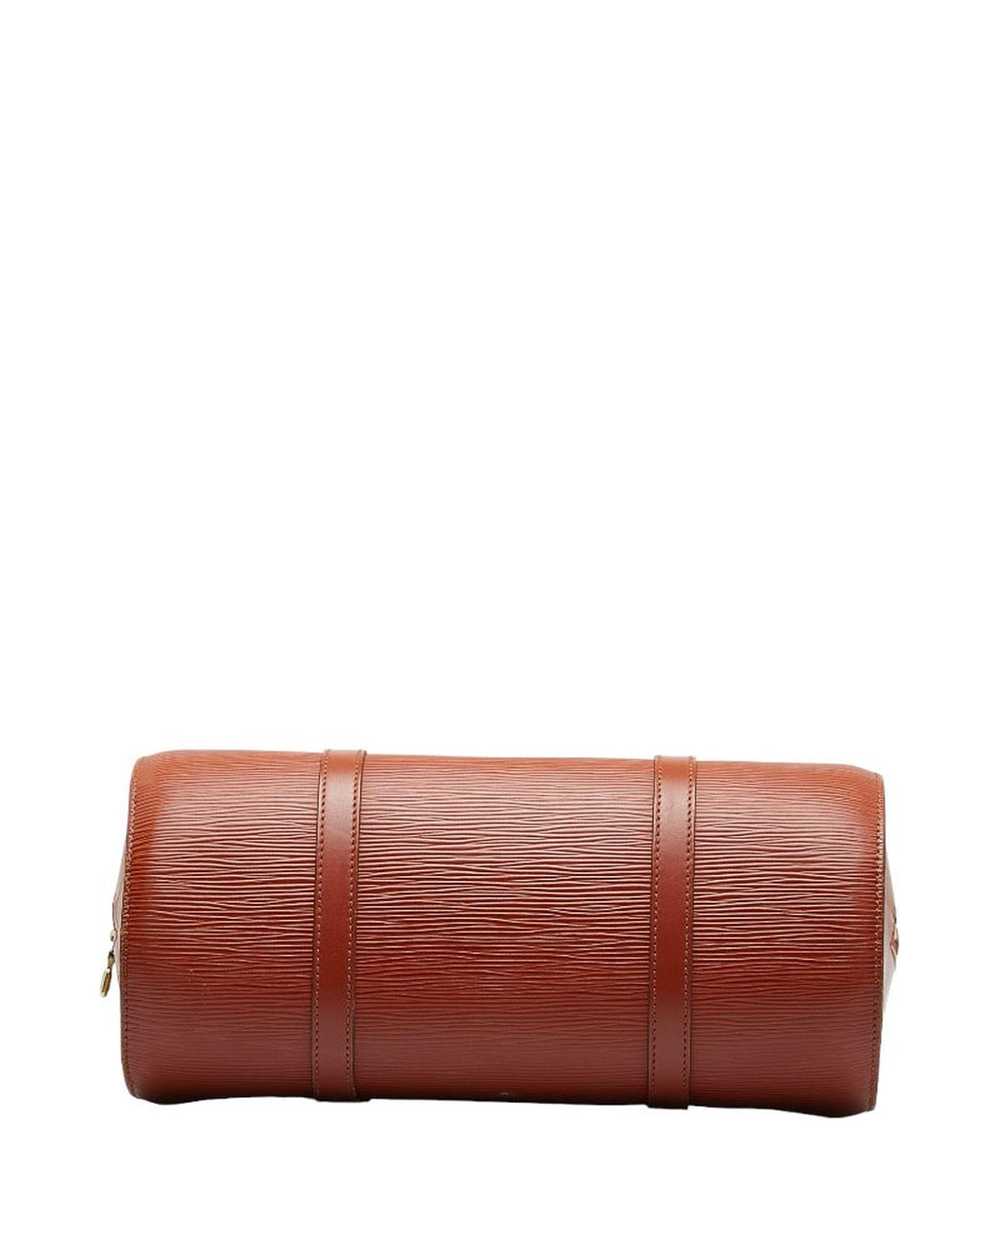 Louis Vuitton Epi Soufflot with Pouch Bag in Brown - image 4